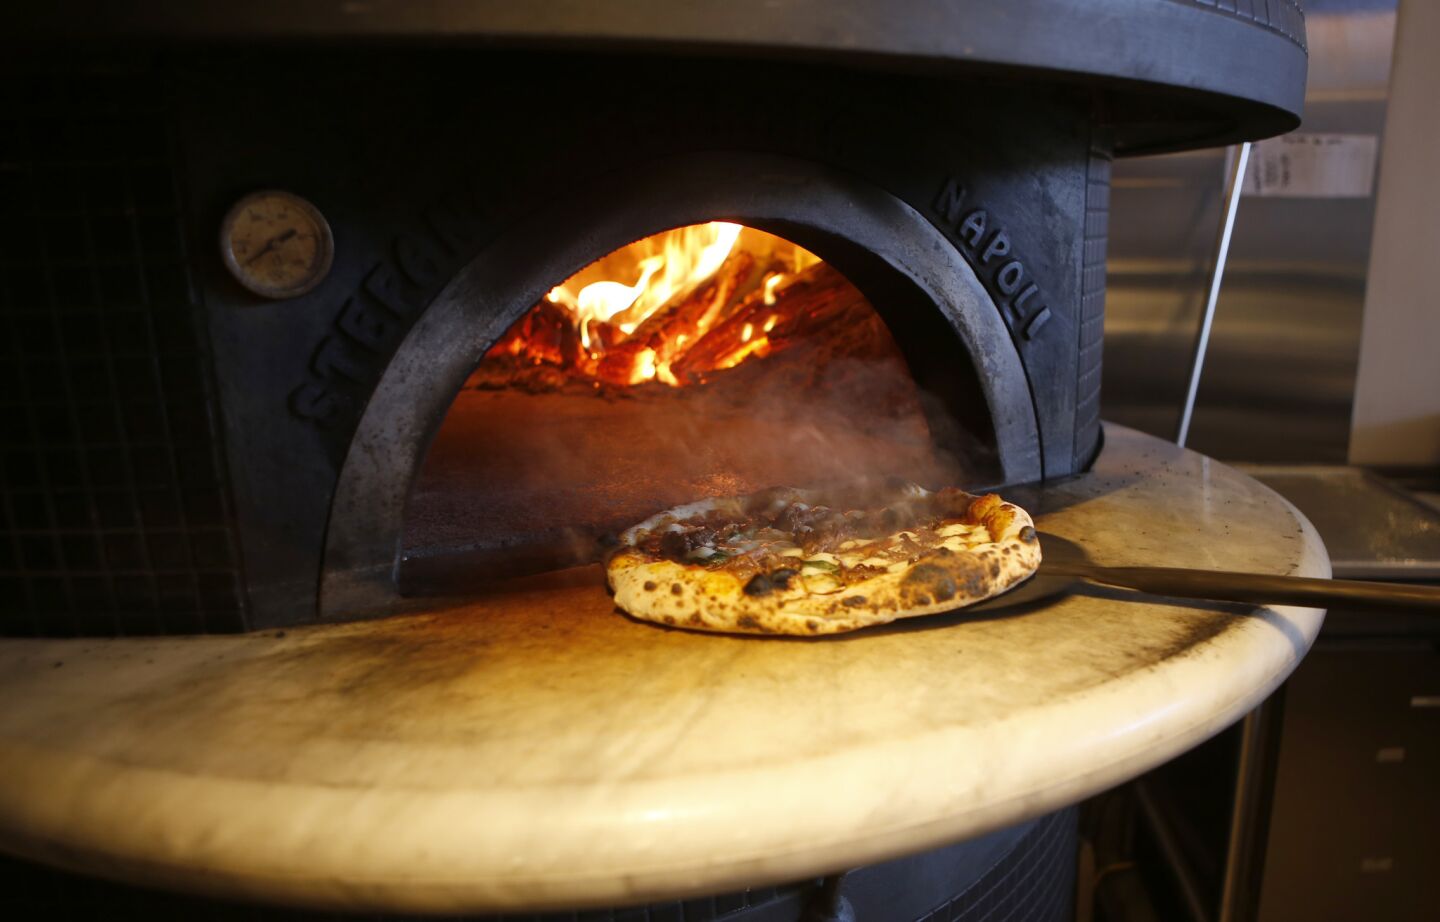 Steam rises from a pizza cooked in a wood oven at Pizzana in Brentwood.